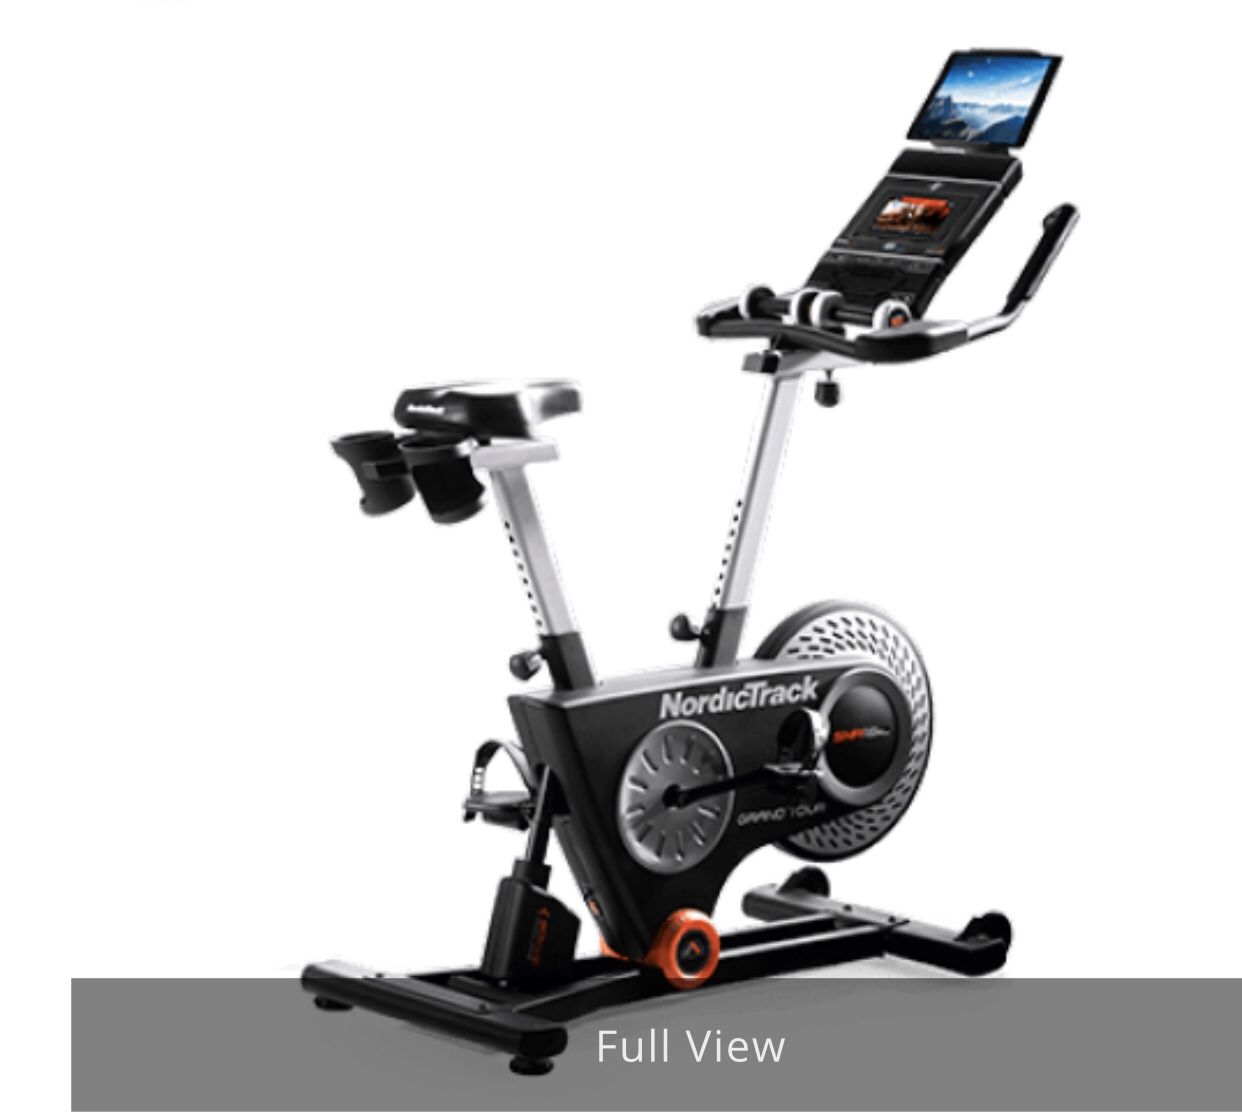 Begin the New Year right with a NordicTrack Grand Tour exercise bike